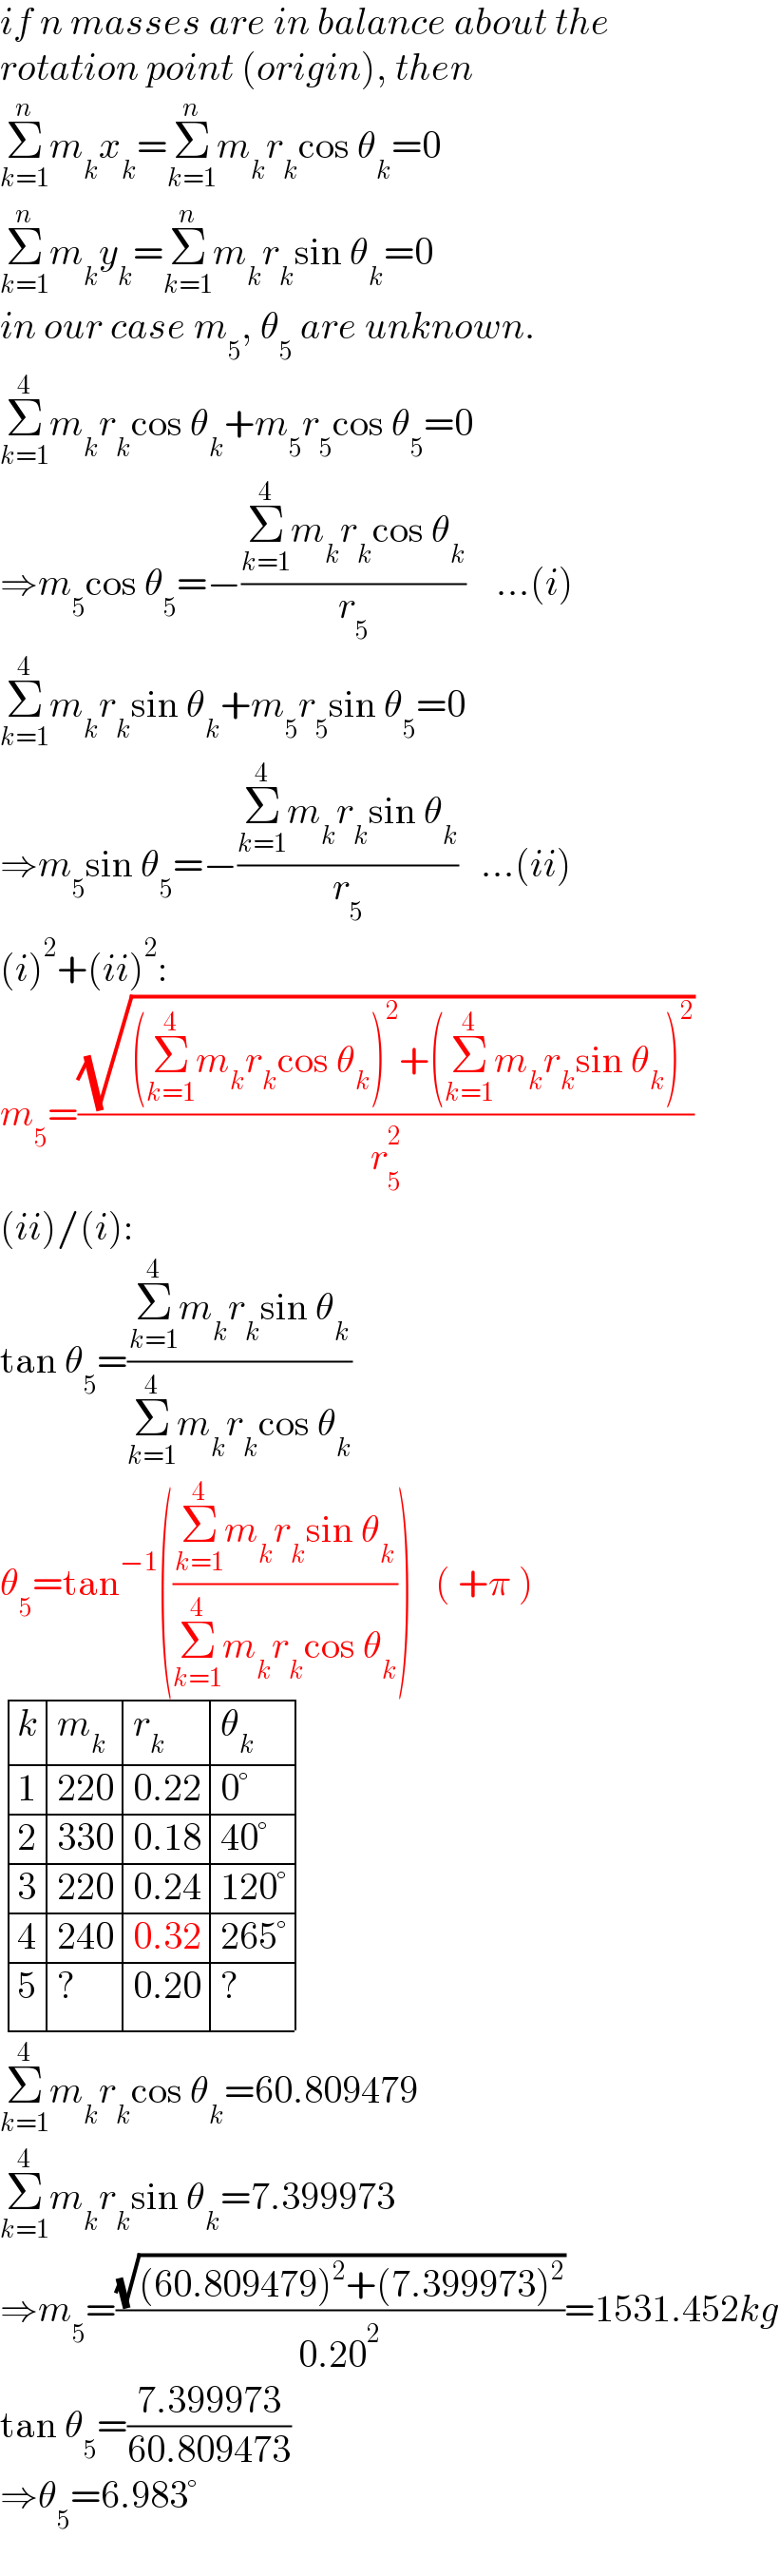 if n masses are in balance about the  rotation point (origin), then  Σ_(k=1) ^n m_k x_k =Σ_(k=1) ^n m_k r_k cos θ_k =0  Σ_(k=1) ^n m_k y_k =Σ_(k=1) ^n m_k r_k sin θ_k =0  in our case m_5 , θ_5  are unknown.  Σ_(k=1) ^4 m_k r_k cos θ_k +m_5 r_5 cos θ_5 =0  ⇒m_5 cos θ_5 =−((Σ_(k=1) ^4 m_k r_k cos θ_k )/r_5 )    ...(i)  Σ_(k=1) ^4 m_k r_k sin θ_k +m_5 r_5 sin θ_5 =0  ⇒m_5 sin θ_5 =−((Σ_(k=1) ^4 m_k r_k sin θ_k )/r_5 )   ...(ii)  (i)^2 +(ii)^2 :  m_5 =((√((Σ_(k=1) ^4 m_k r_k cos θ_k )^2 +(Σ_(k=1) ^4 m_k r_k sin θ_k )^2 ))/r_5 ^2 )  (ii)/(i):  tan θ_5 =((Σ_(k=1) ^4 m_k r_k sin θ_k )/(Σ_(k=1) ^4 m_k r_k cos θ_k ))  θ_5 =tan^(−1) (((Σ_(k=1) ^4 m_k r_k sin θ_k )/(Σ_(k=1) ^4 m_k r_k cos θ_k )))   ( +π )   determinant ((k,m_k ,r_k ,θ_k ),(1,(220),(0.22),(0°)),(2,(330),(0.18),(40°)),(3,(220),(0.24),(120°)),(4,(240),(0.32),(265°)),(5,?,(0.20),?))  Σ_(k=1) ^4 m_k r_k cos θ_k =60.809479  Σ_(k=1) ^4 m_k r_k sin θ_k =7.399973  ⇒m_5 =((√((60.809479)^2 +(7.399973)^2 ))/(0.20^2 ))=1531.452kg  tan θ_5 =((7.399973)/(60.809473))  ⇒θ_5 =6.983°  